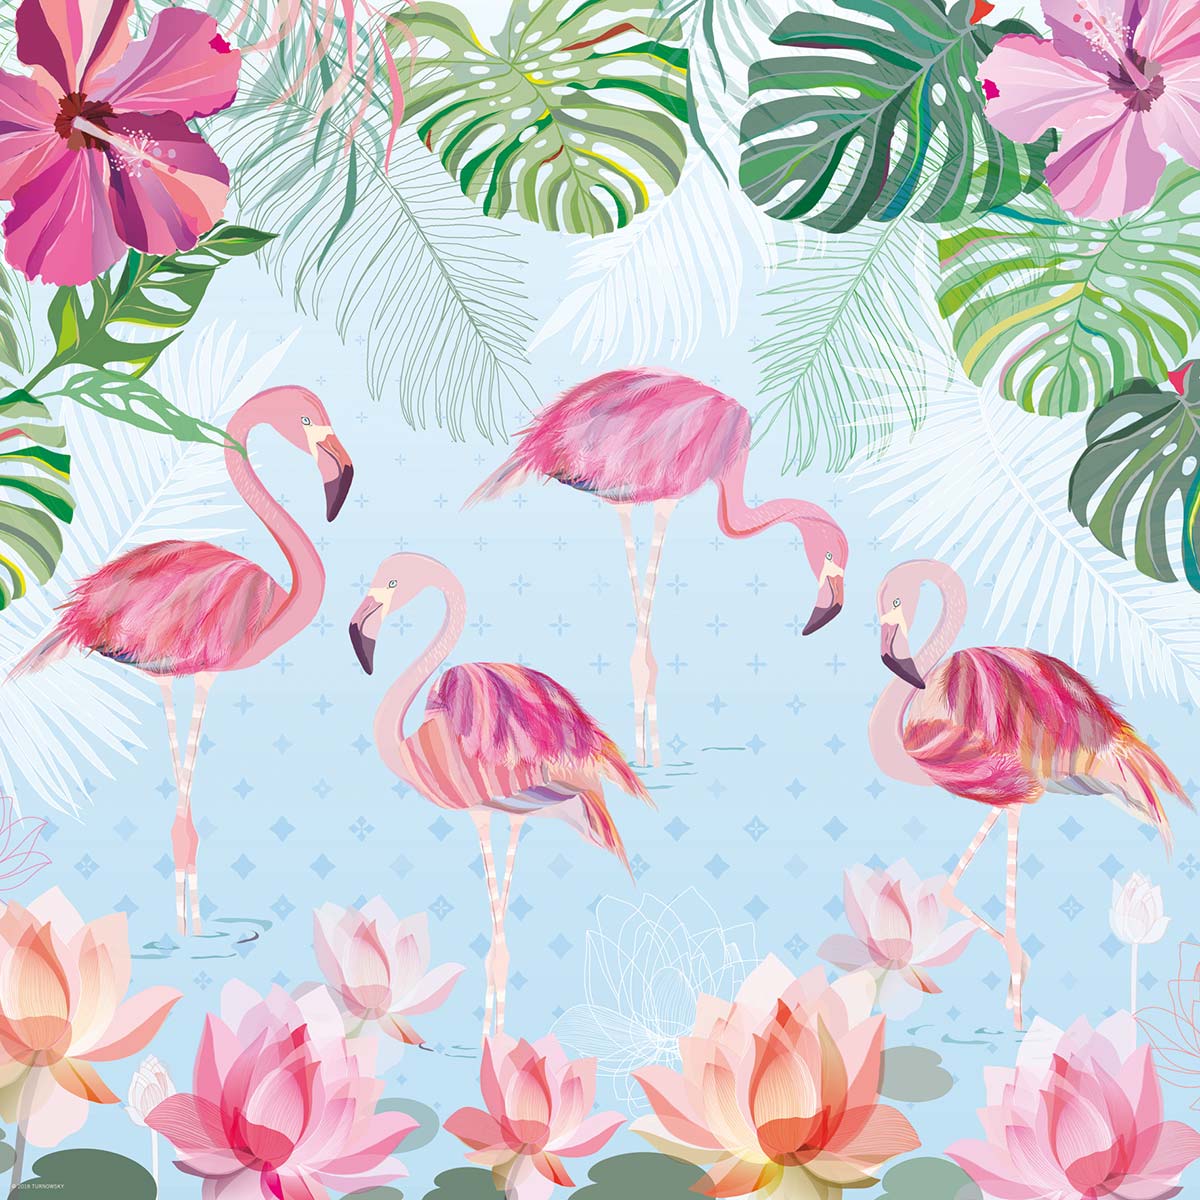 Flamingos & Lilies - Scratch and Dent Birds Jigsaw Puzzle